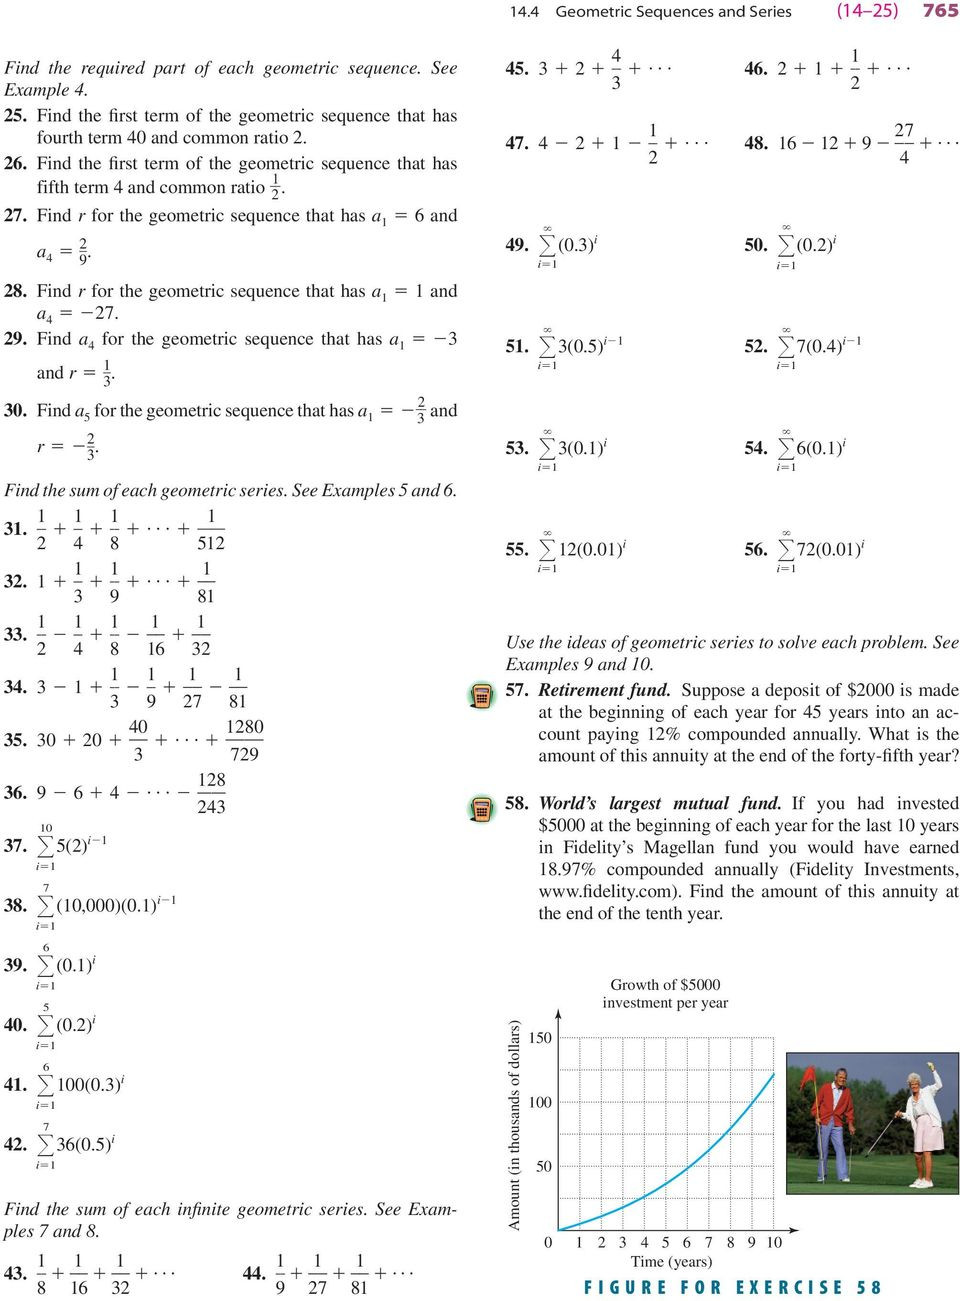 Geometric Sequences Worksheet Answers Geometric Sequences and Series Pdf Free Download